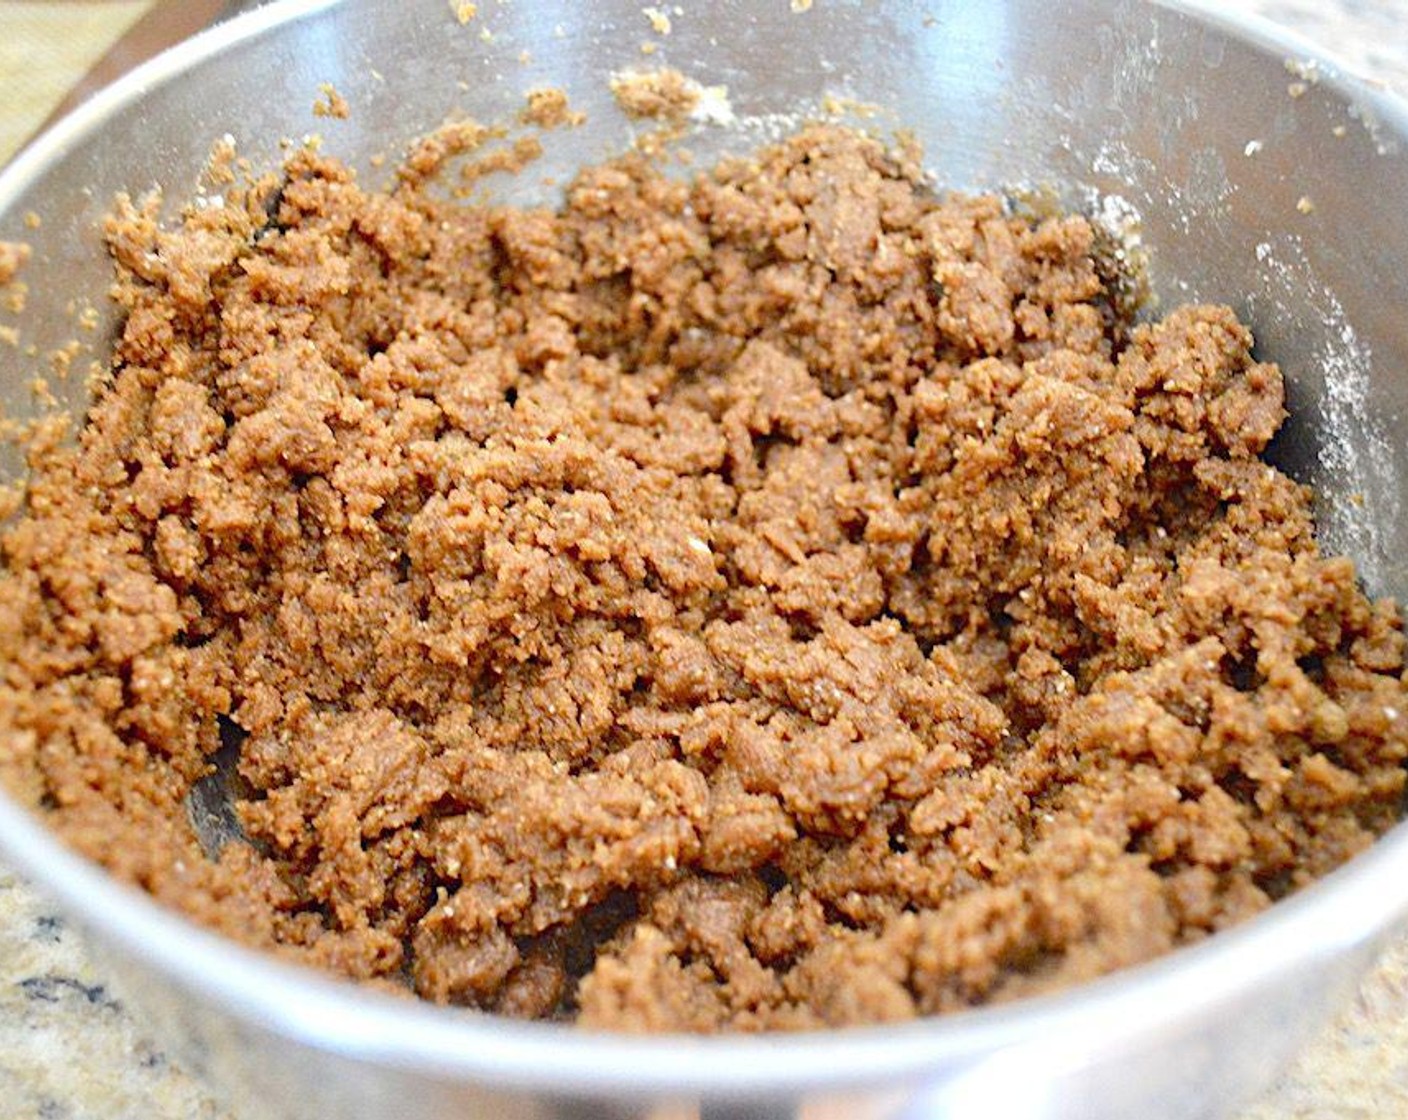 step 2 Combine Almond Butter (1 cup), Dark Brown Sugar (1 cup), Egg (1), Coconut Flour (2 Tbsp), Coconut Extract (1 tsp), and Ground Cinnamon (1/2 tsp) in a large mixing bowl and use a hand mixer to beat it together thoroughly into a dough.